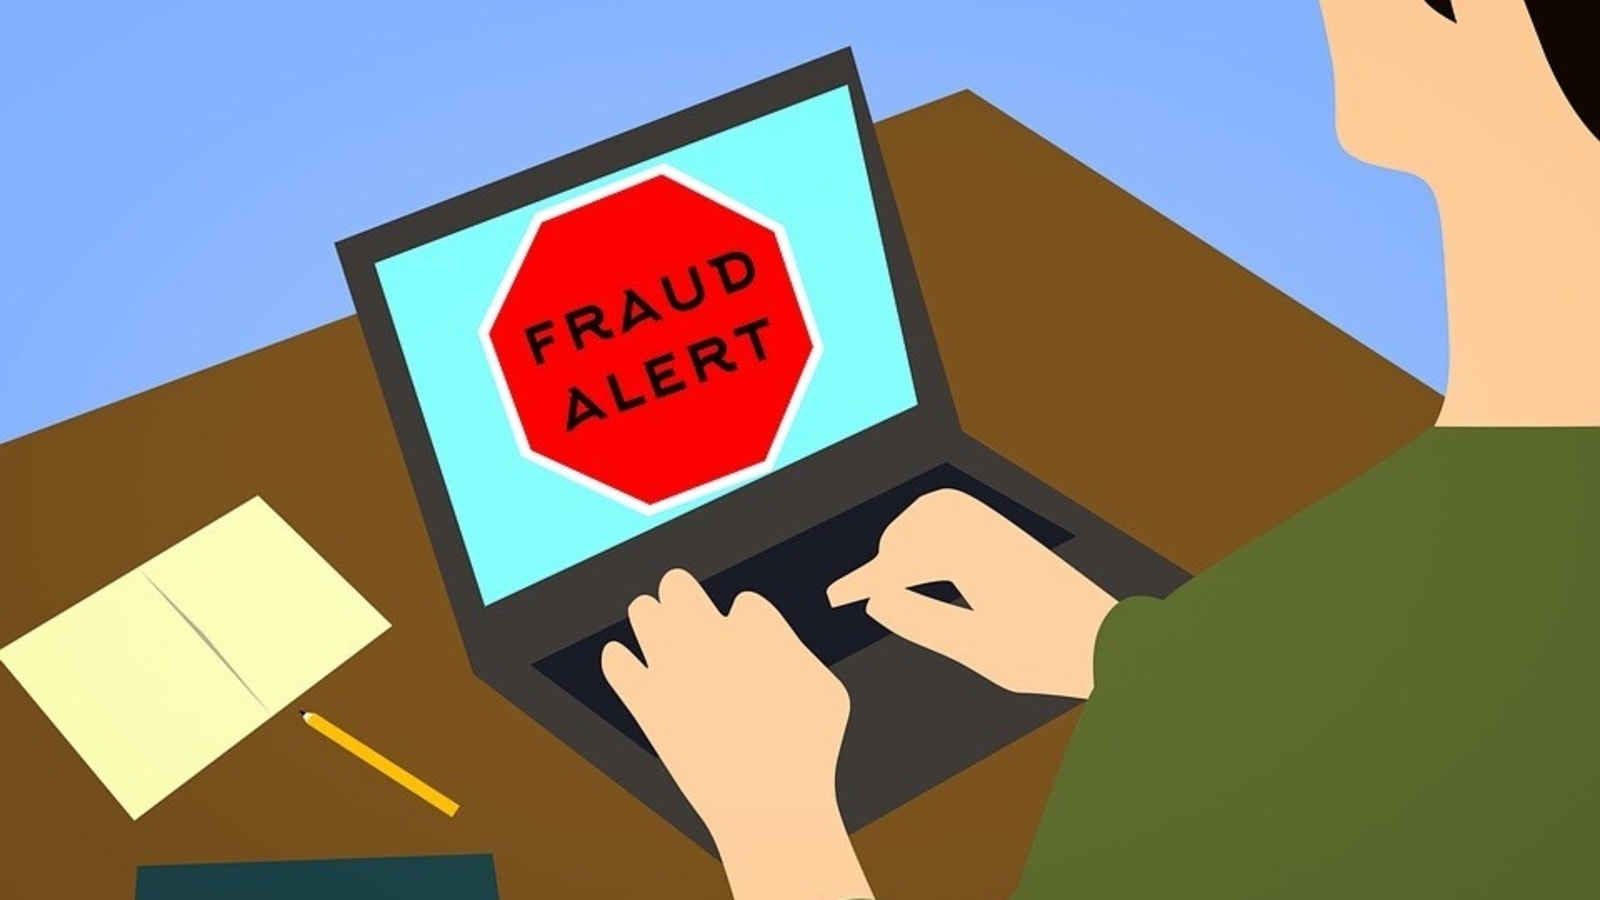 What is OLX fraud and how do you save yourself from it? - Quora